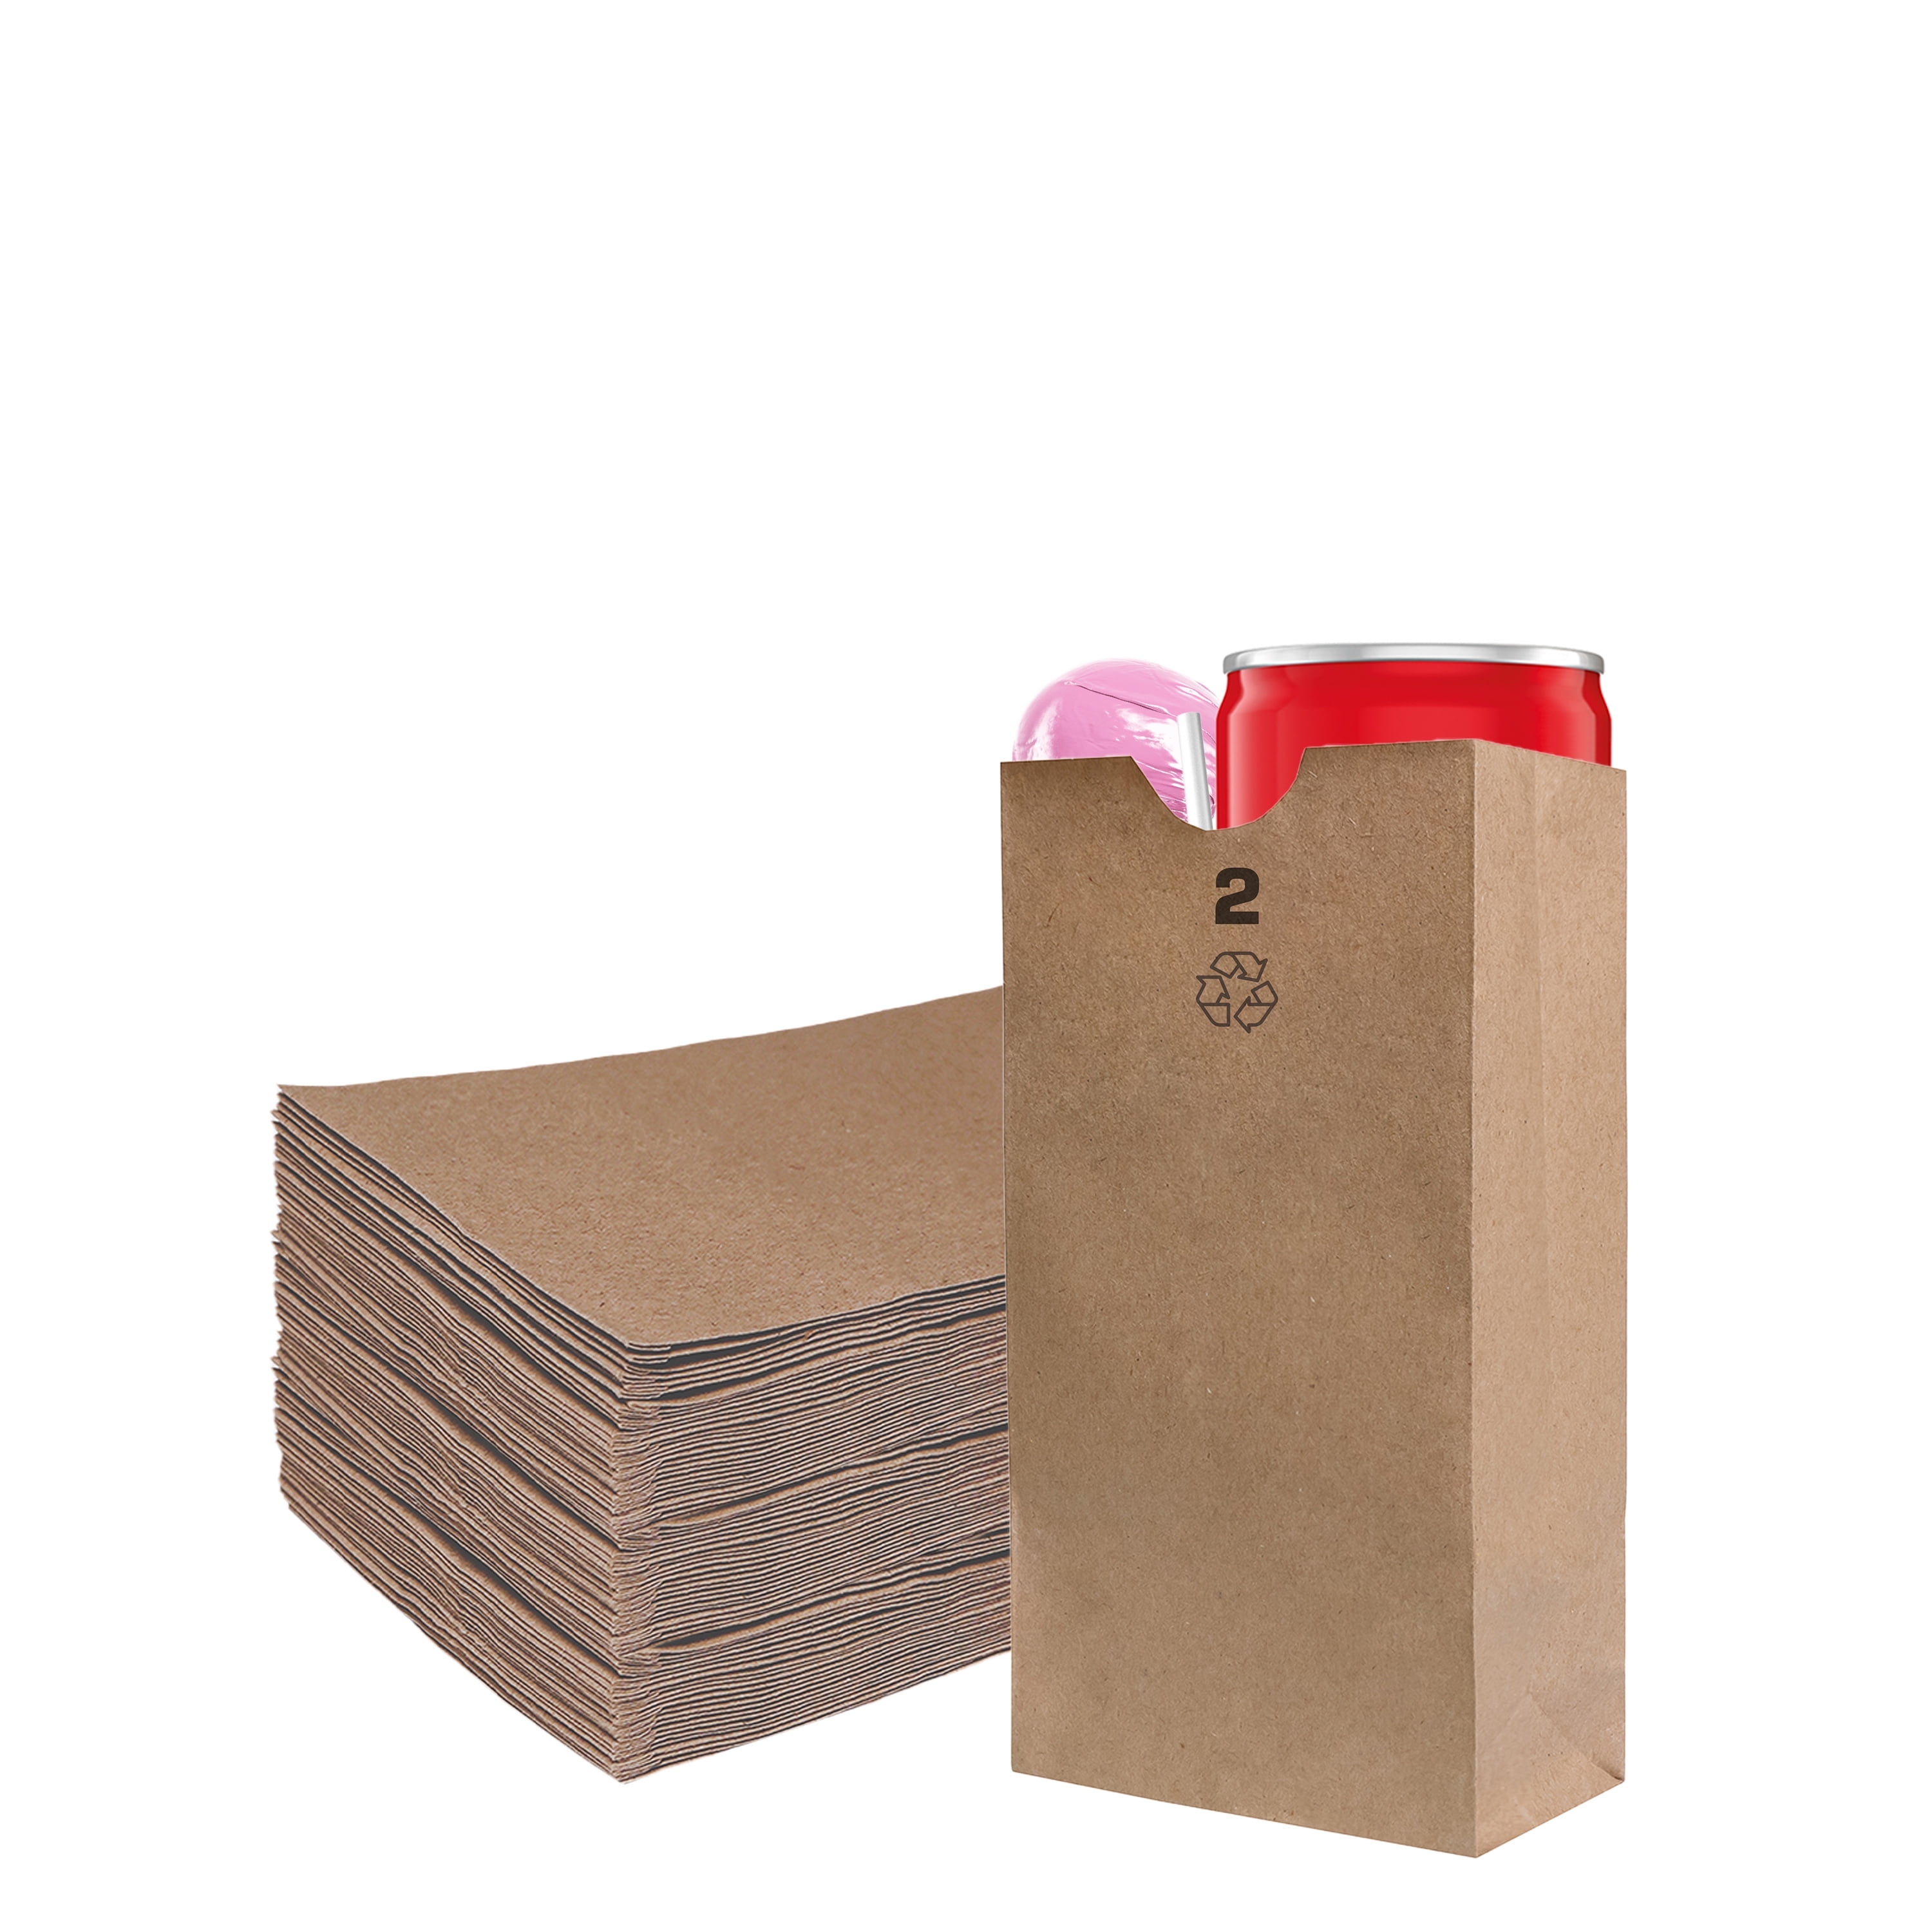 [200 Count] Mini Brown Kraft Paper Bag (2 lb) Small - Paper Lunch Bags,  Small Snacks, Gift Bags, Grocery, Merchandise, Party Bags (4 5/16